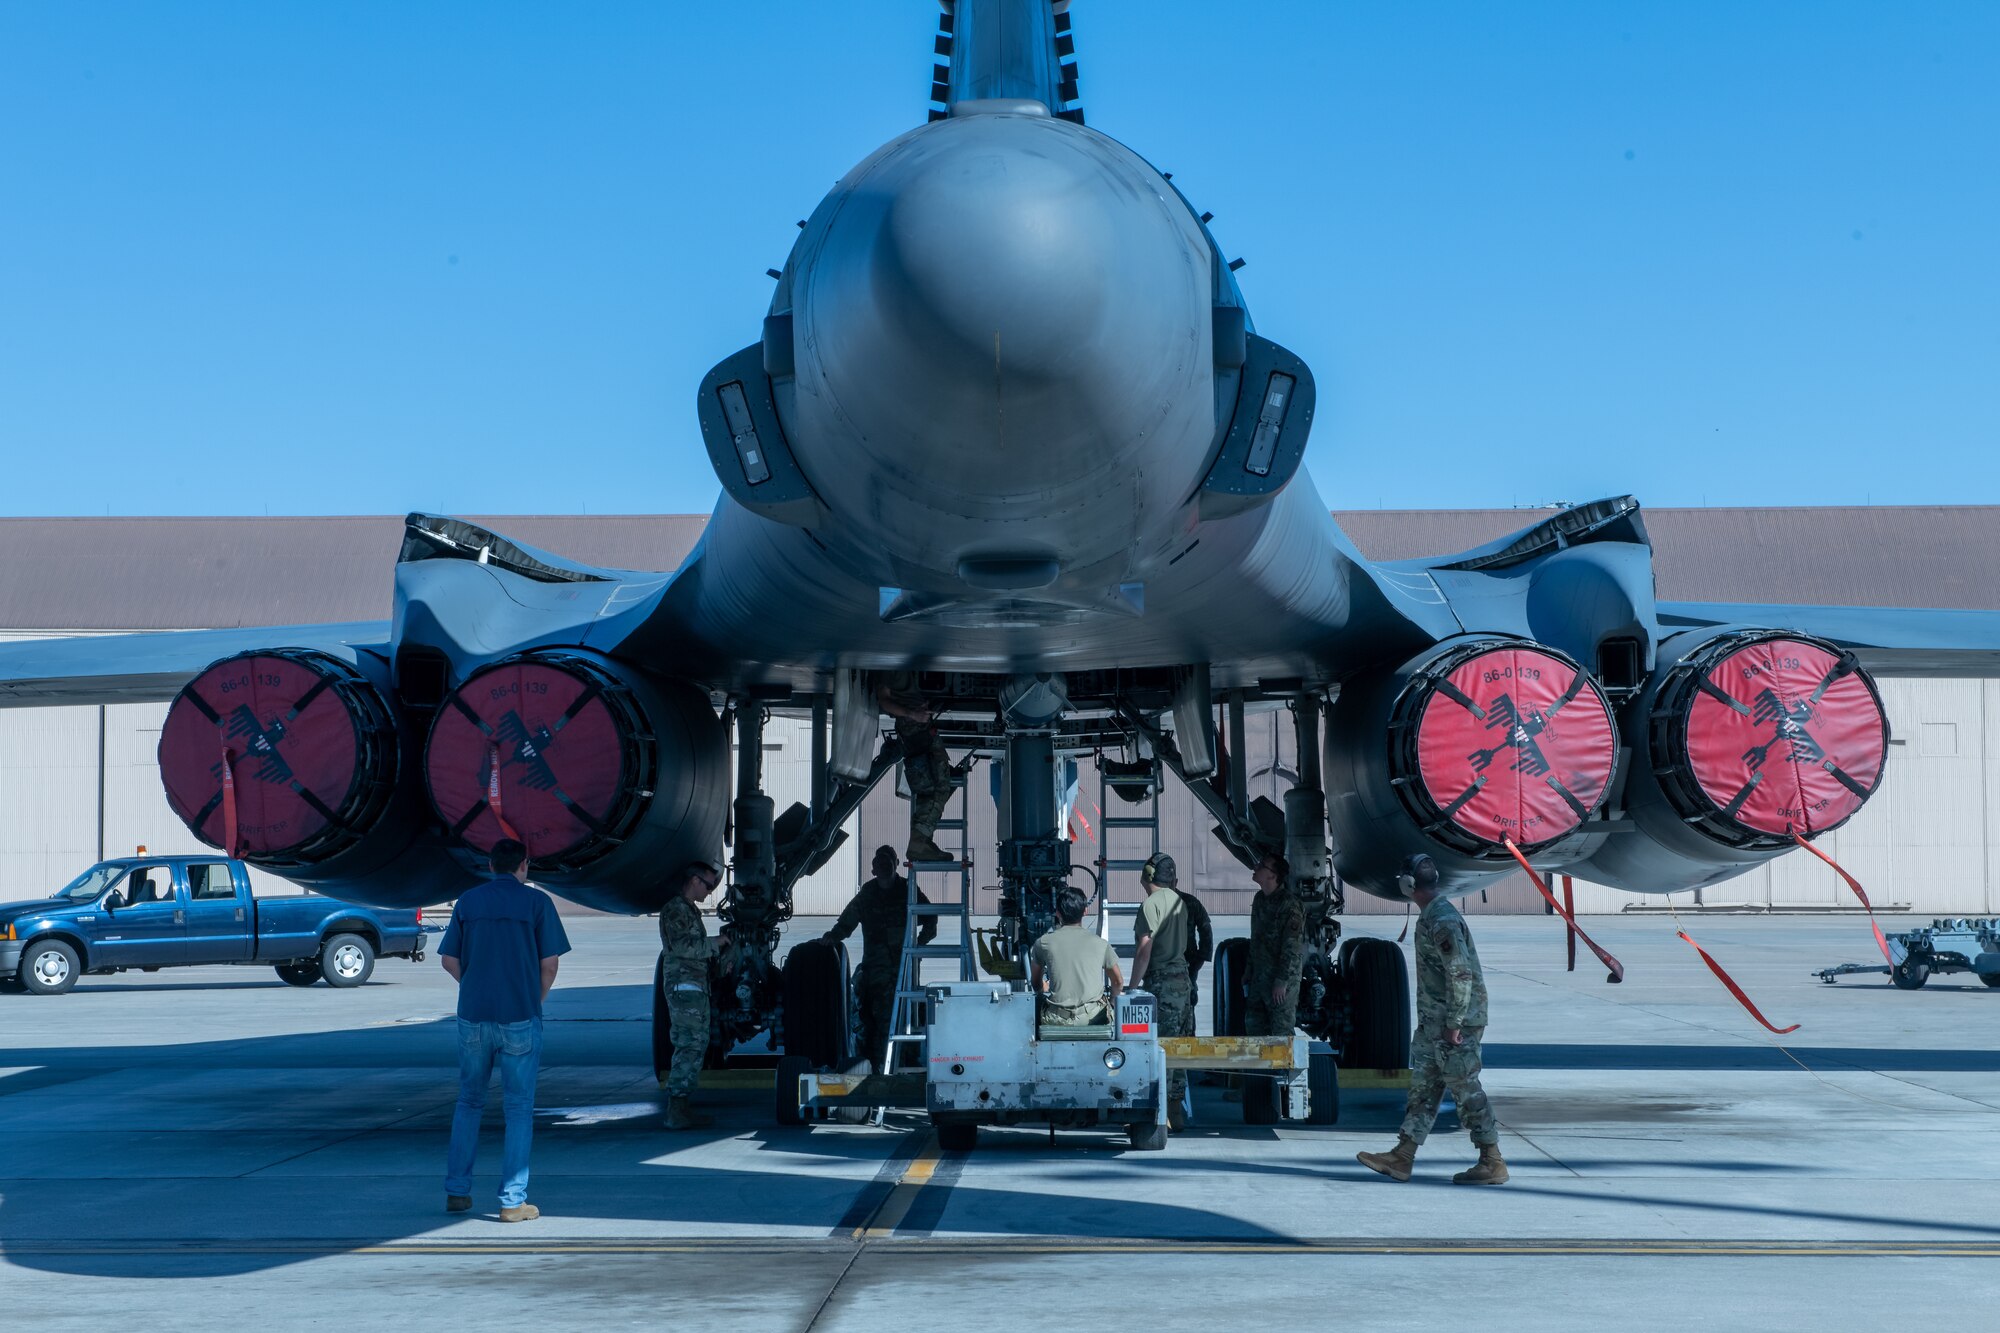 U.S. Air Force Airmen from the 28th Aircraft Maintenance Squadron load the final munitions of a weapons loading competition into a B-1B Lancer at Ellsworth Air Force Base, S.D., July 22, 2022.